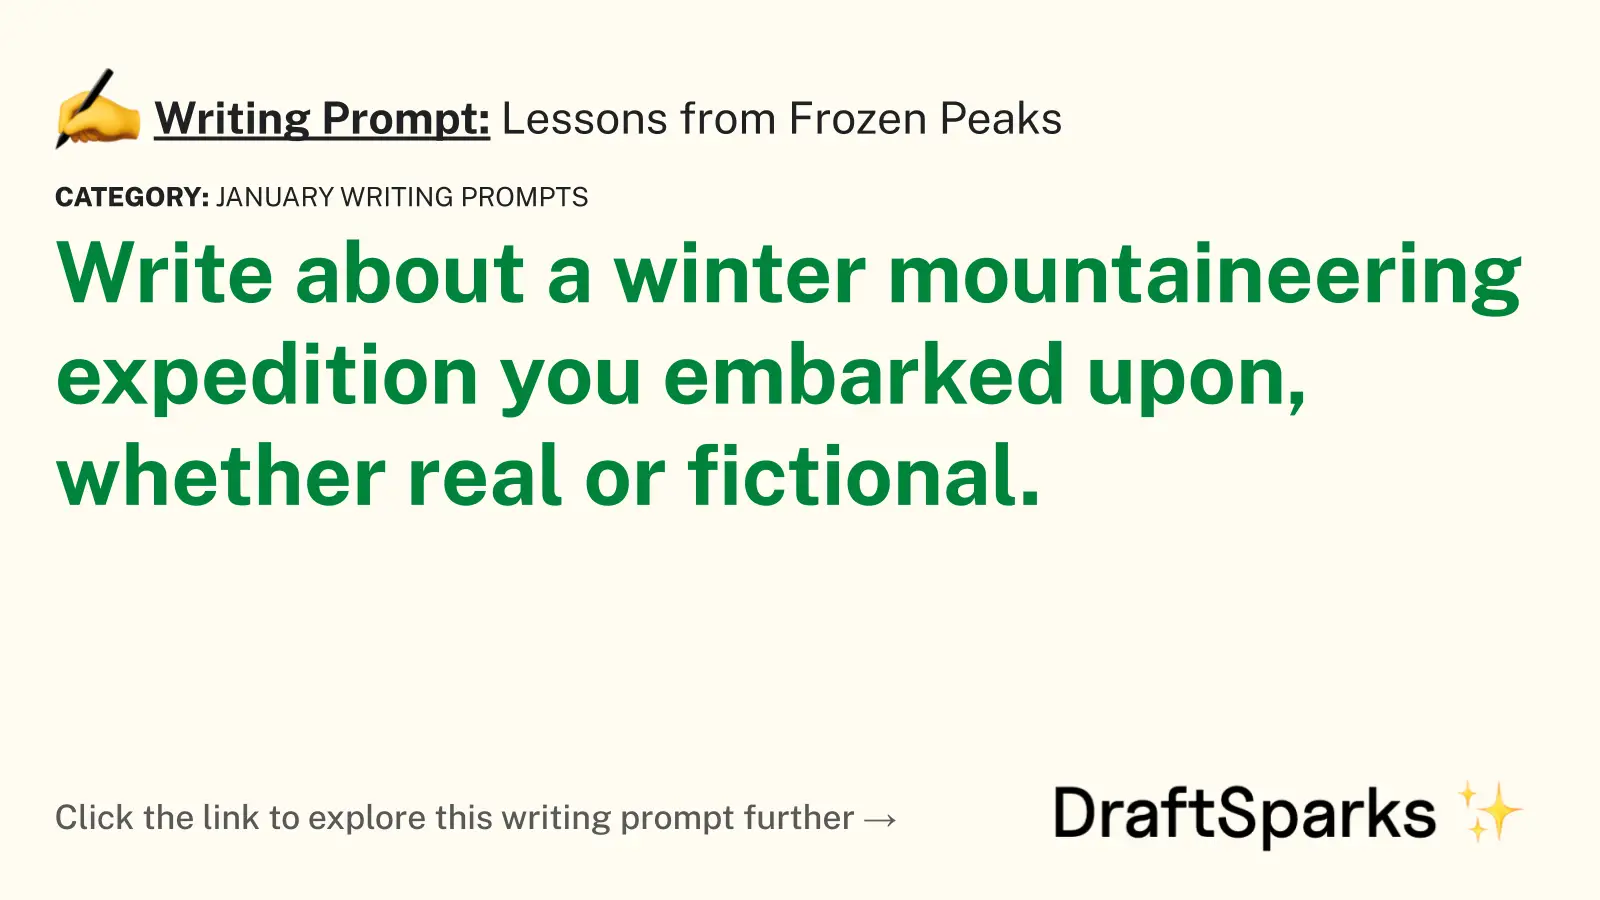 Lessons from Frozen Peaks